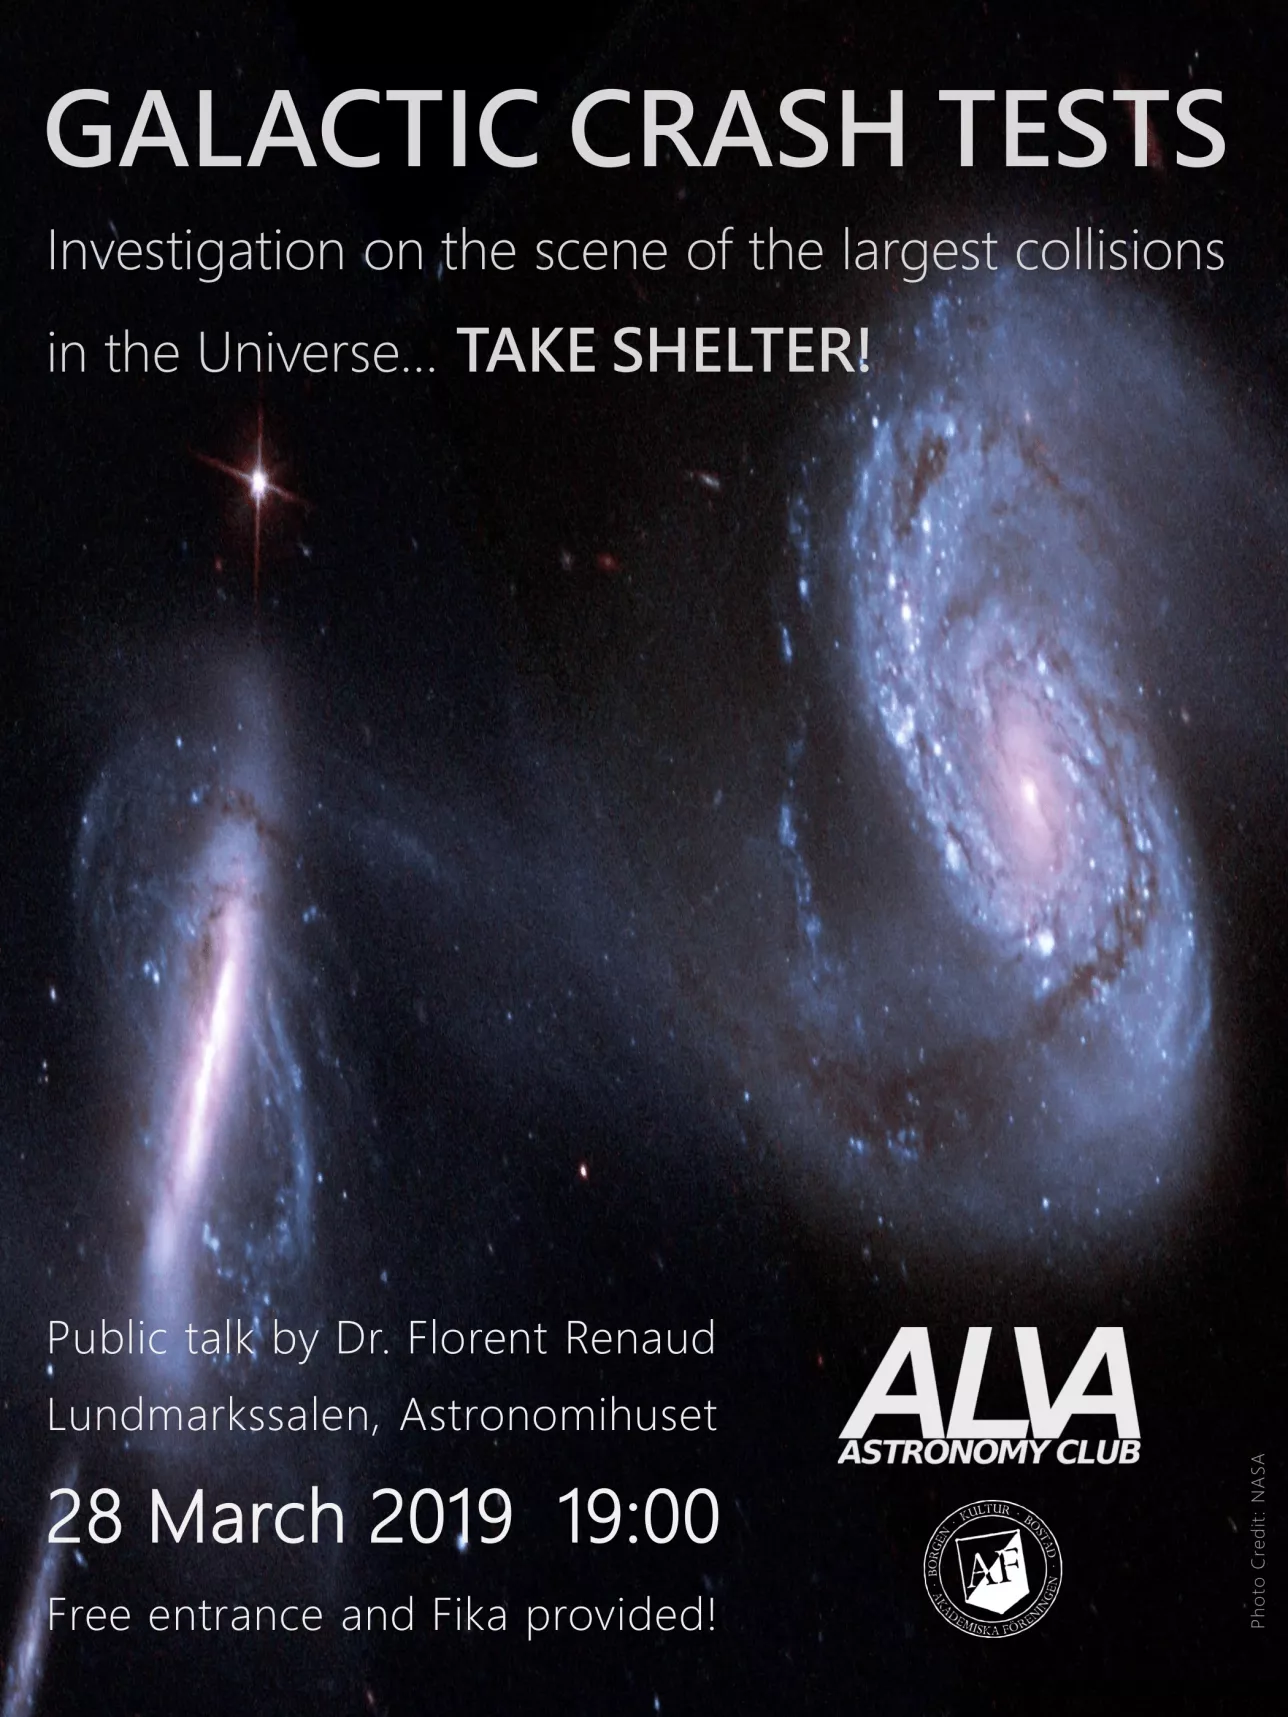 Poster with picture of galaxies